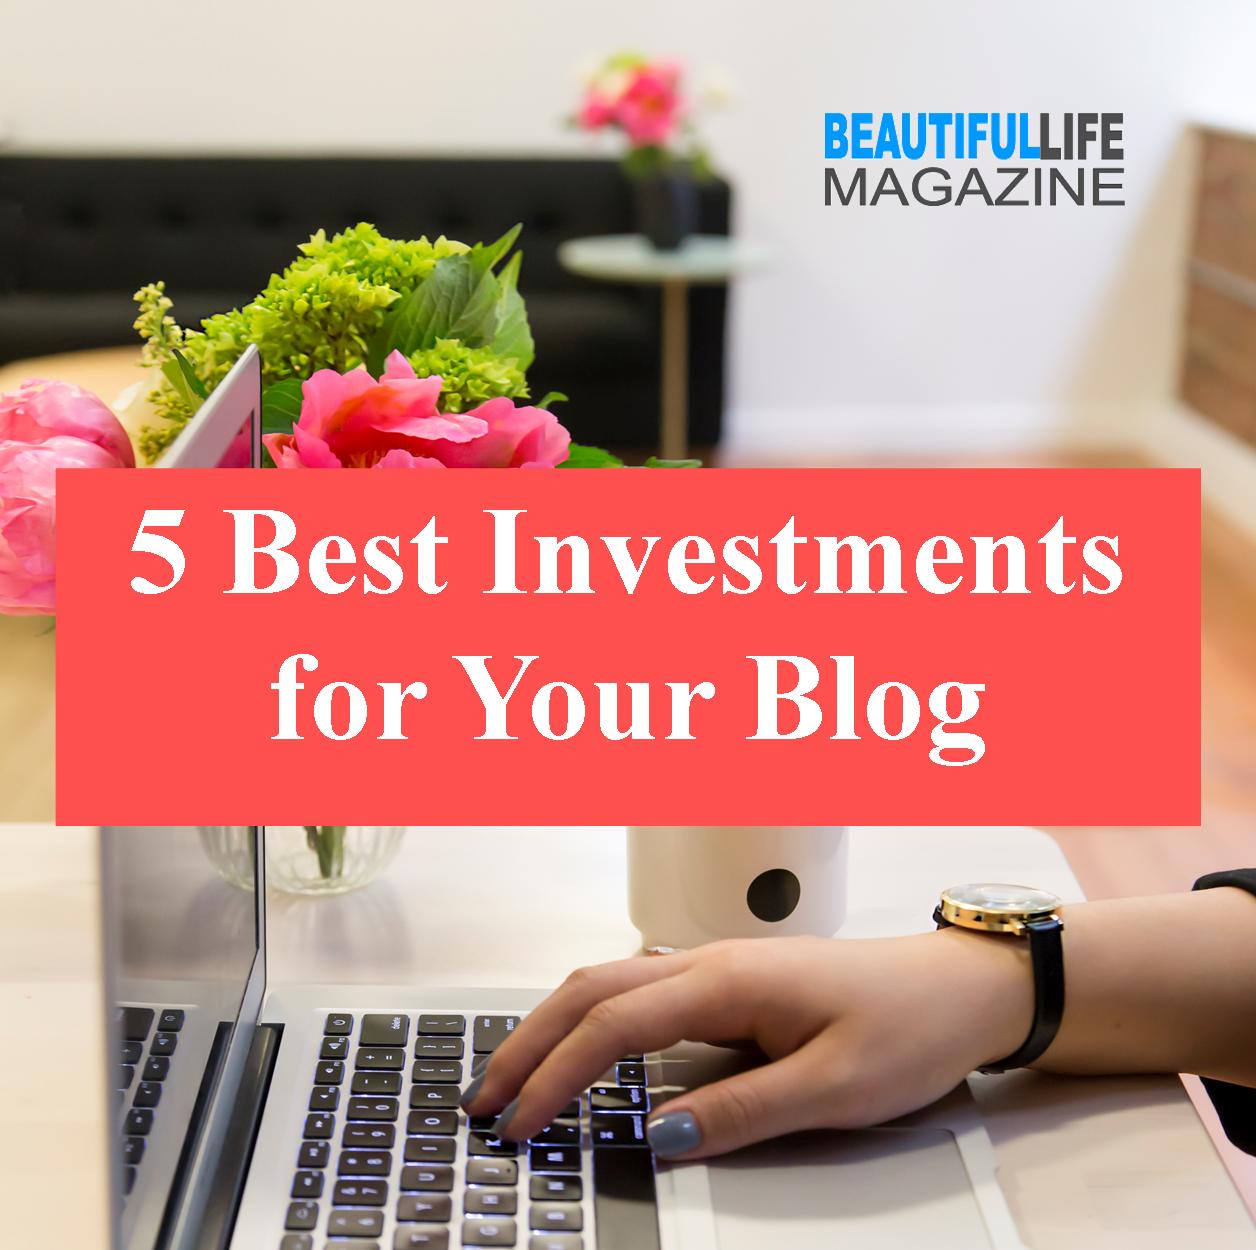 I want to share with you the 5 things you should consider investing in for your blog if you are ready to take that crucial step with some good investments.